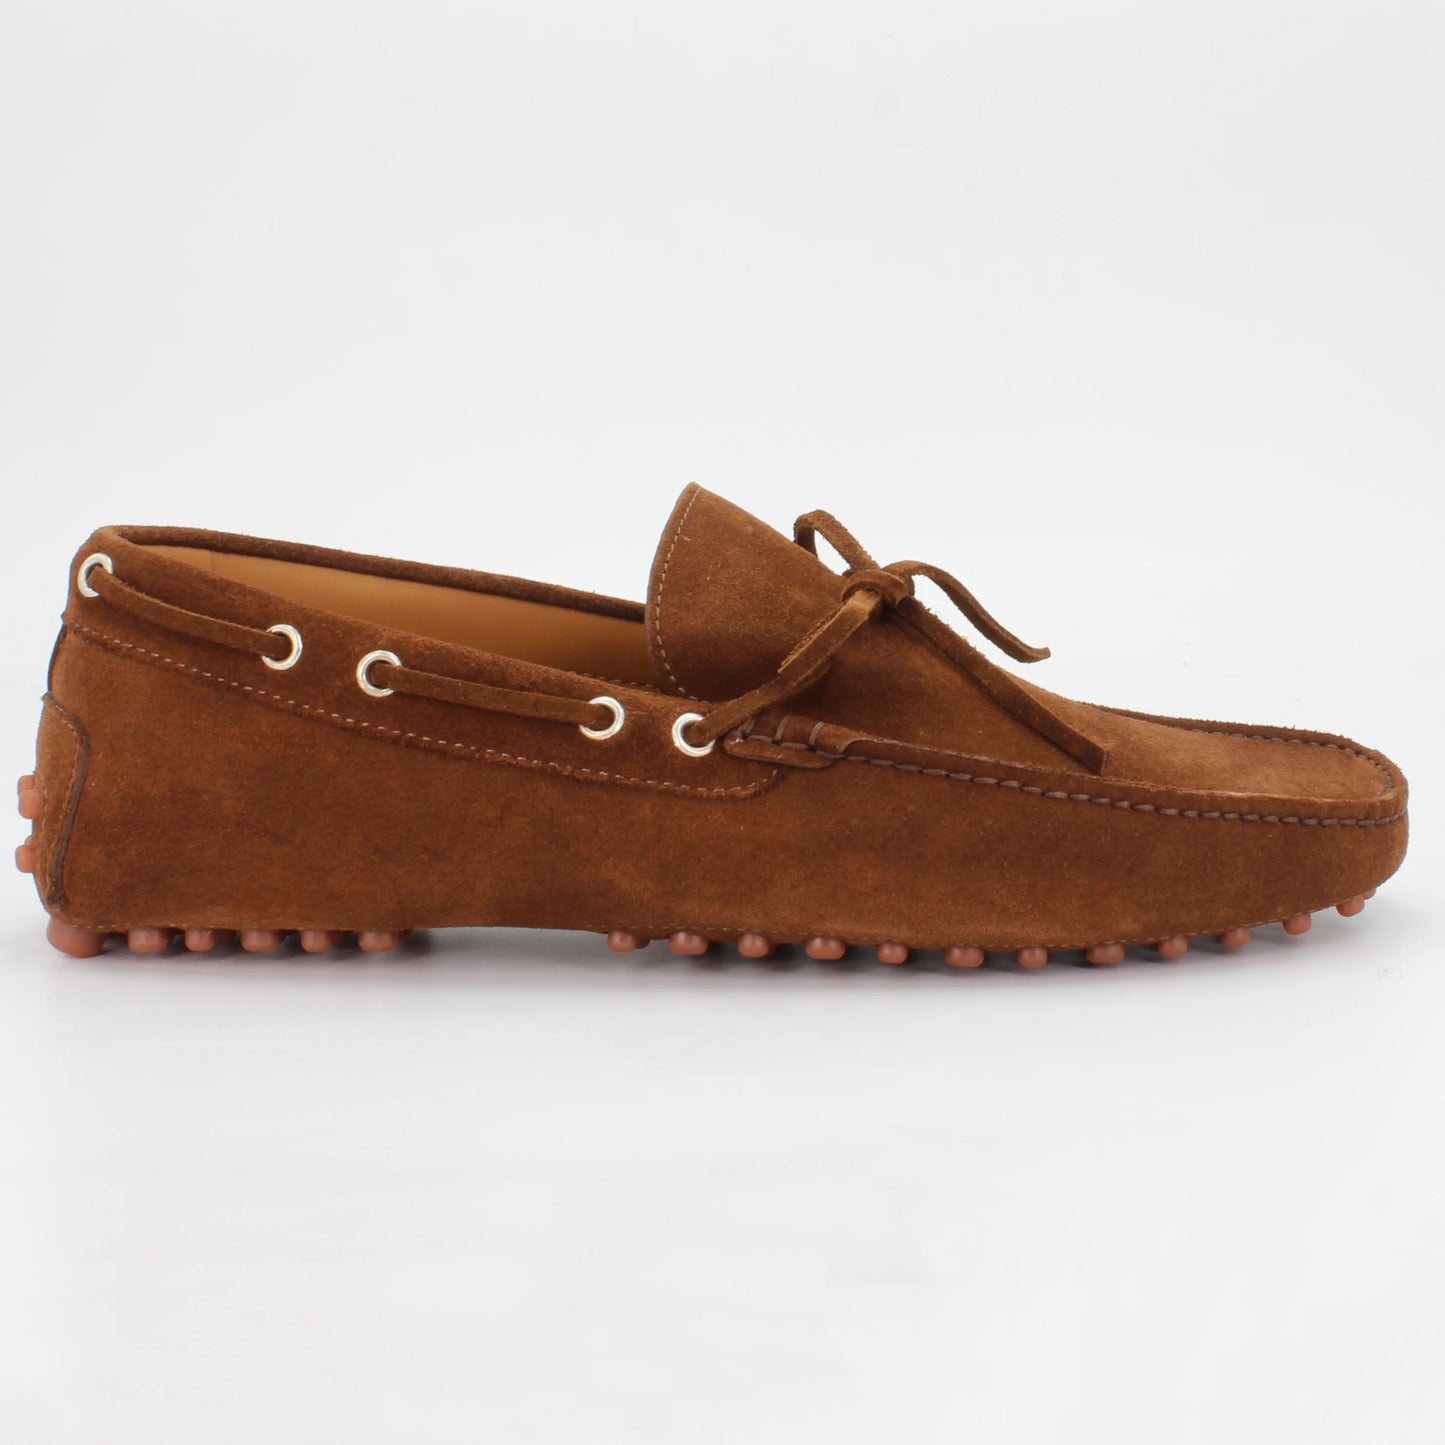 Shop Handmade Italian Leather moccasin in chestnut velour (UO460003) or browse our range of hand-made Italian shoes for men in leather or suede in-store at Aliverti Cape Town, or shop online. We deliver in South Africa & offer multiple payment plans as well as accept multiple safe & secure payment methods.